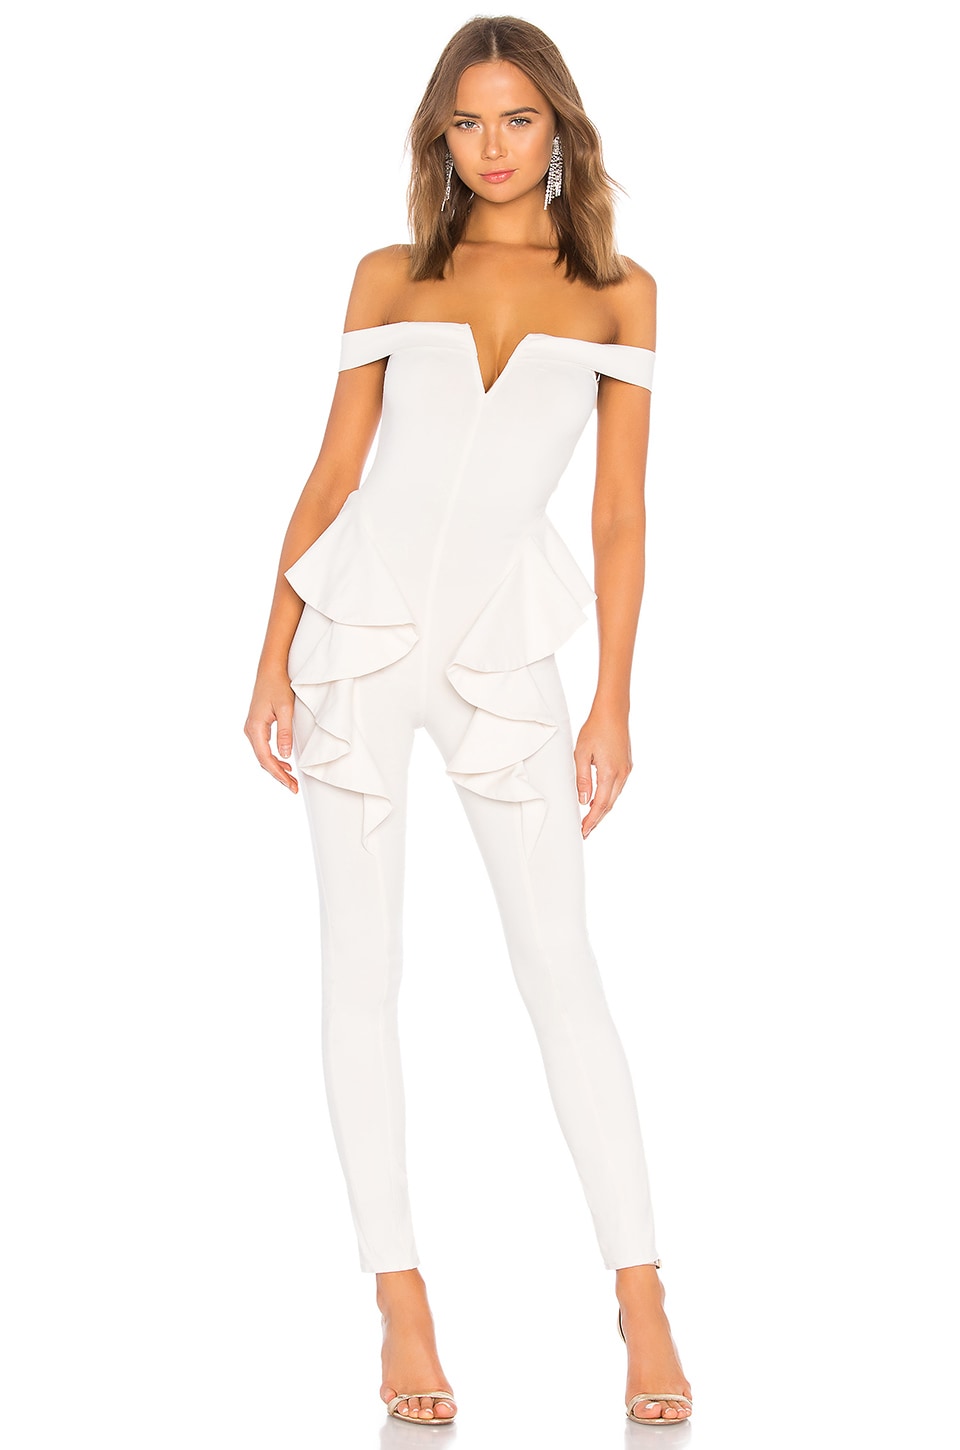 MICHAEL COSTELLO MICHAEL COSTELLO X REVOLVE JERIC JUMPSUIT IN IVORY,MELR-WC5